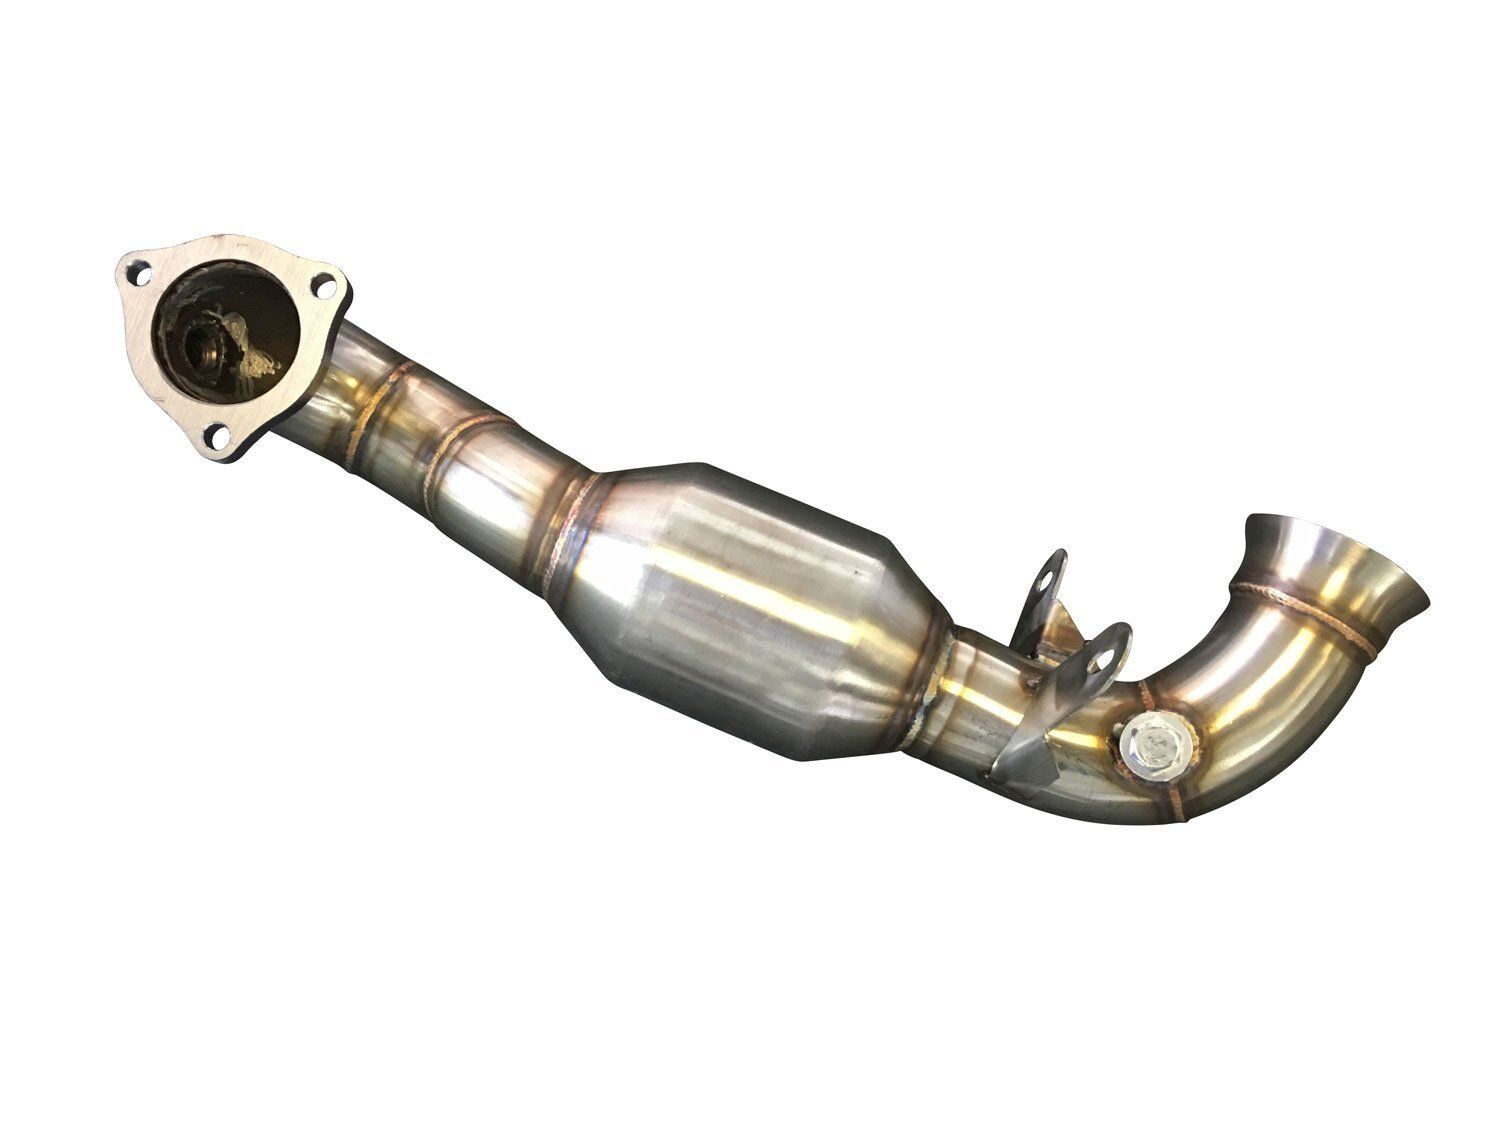 CNT Racing downpipe for Mini Cooper S Catted downpipe R57 R58 R60 turbo models